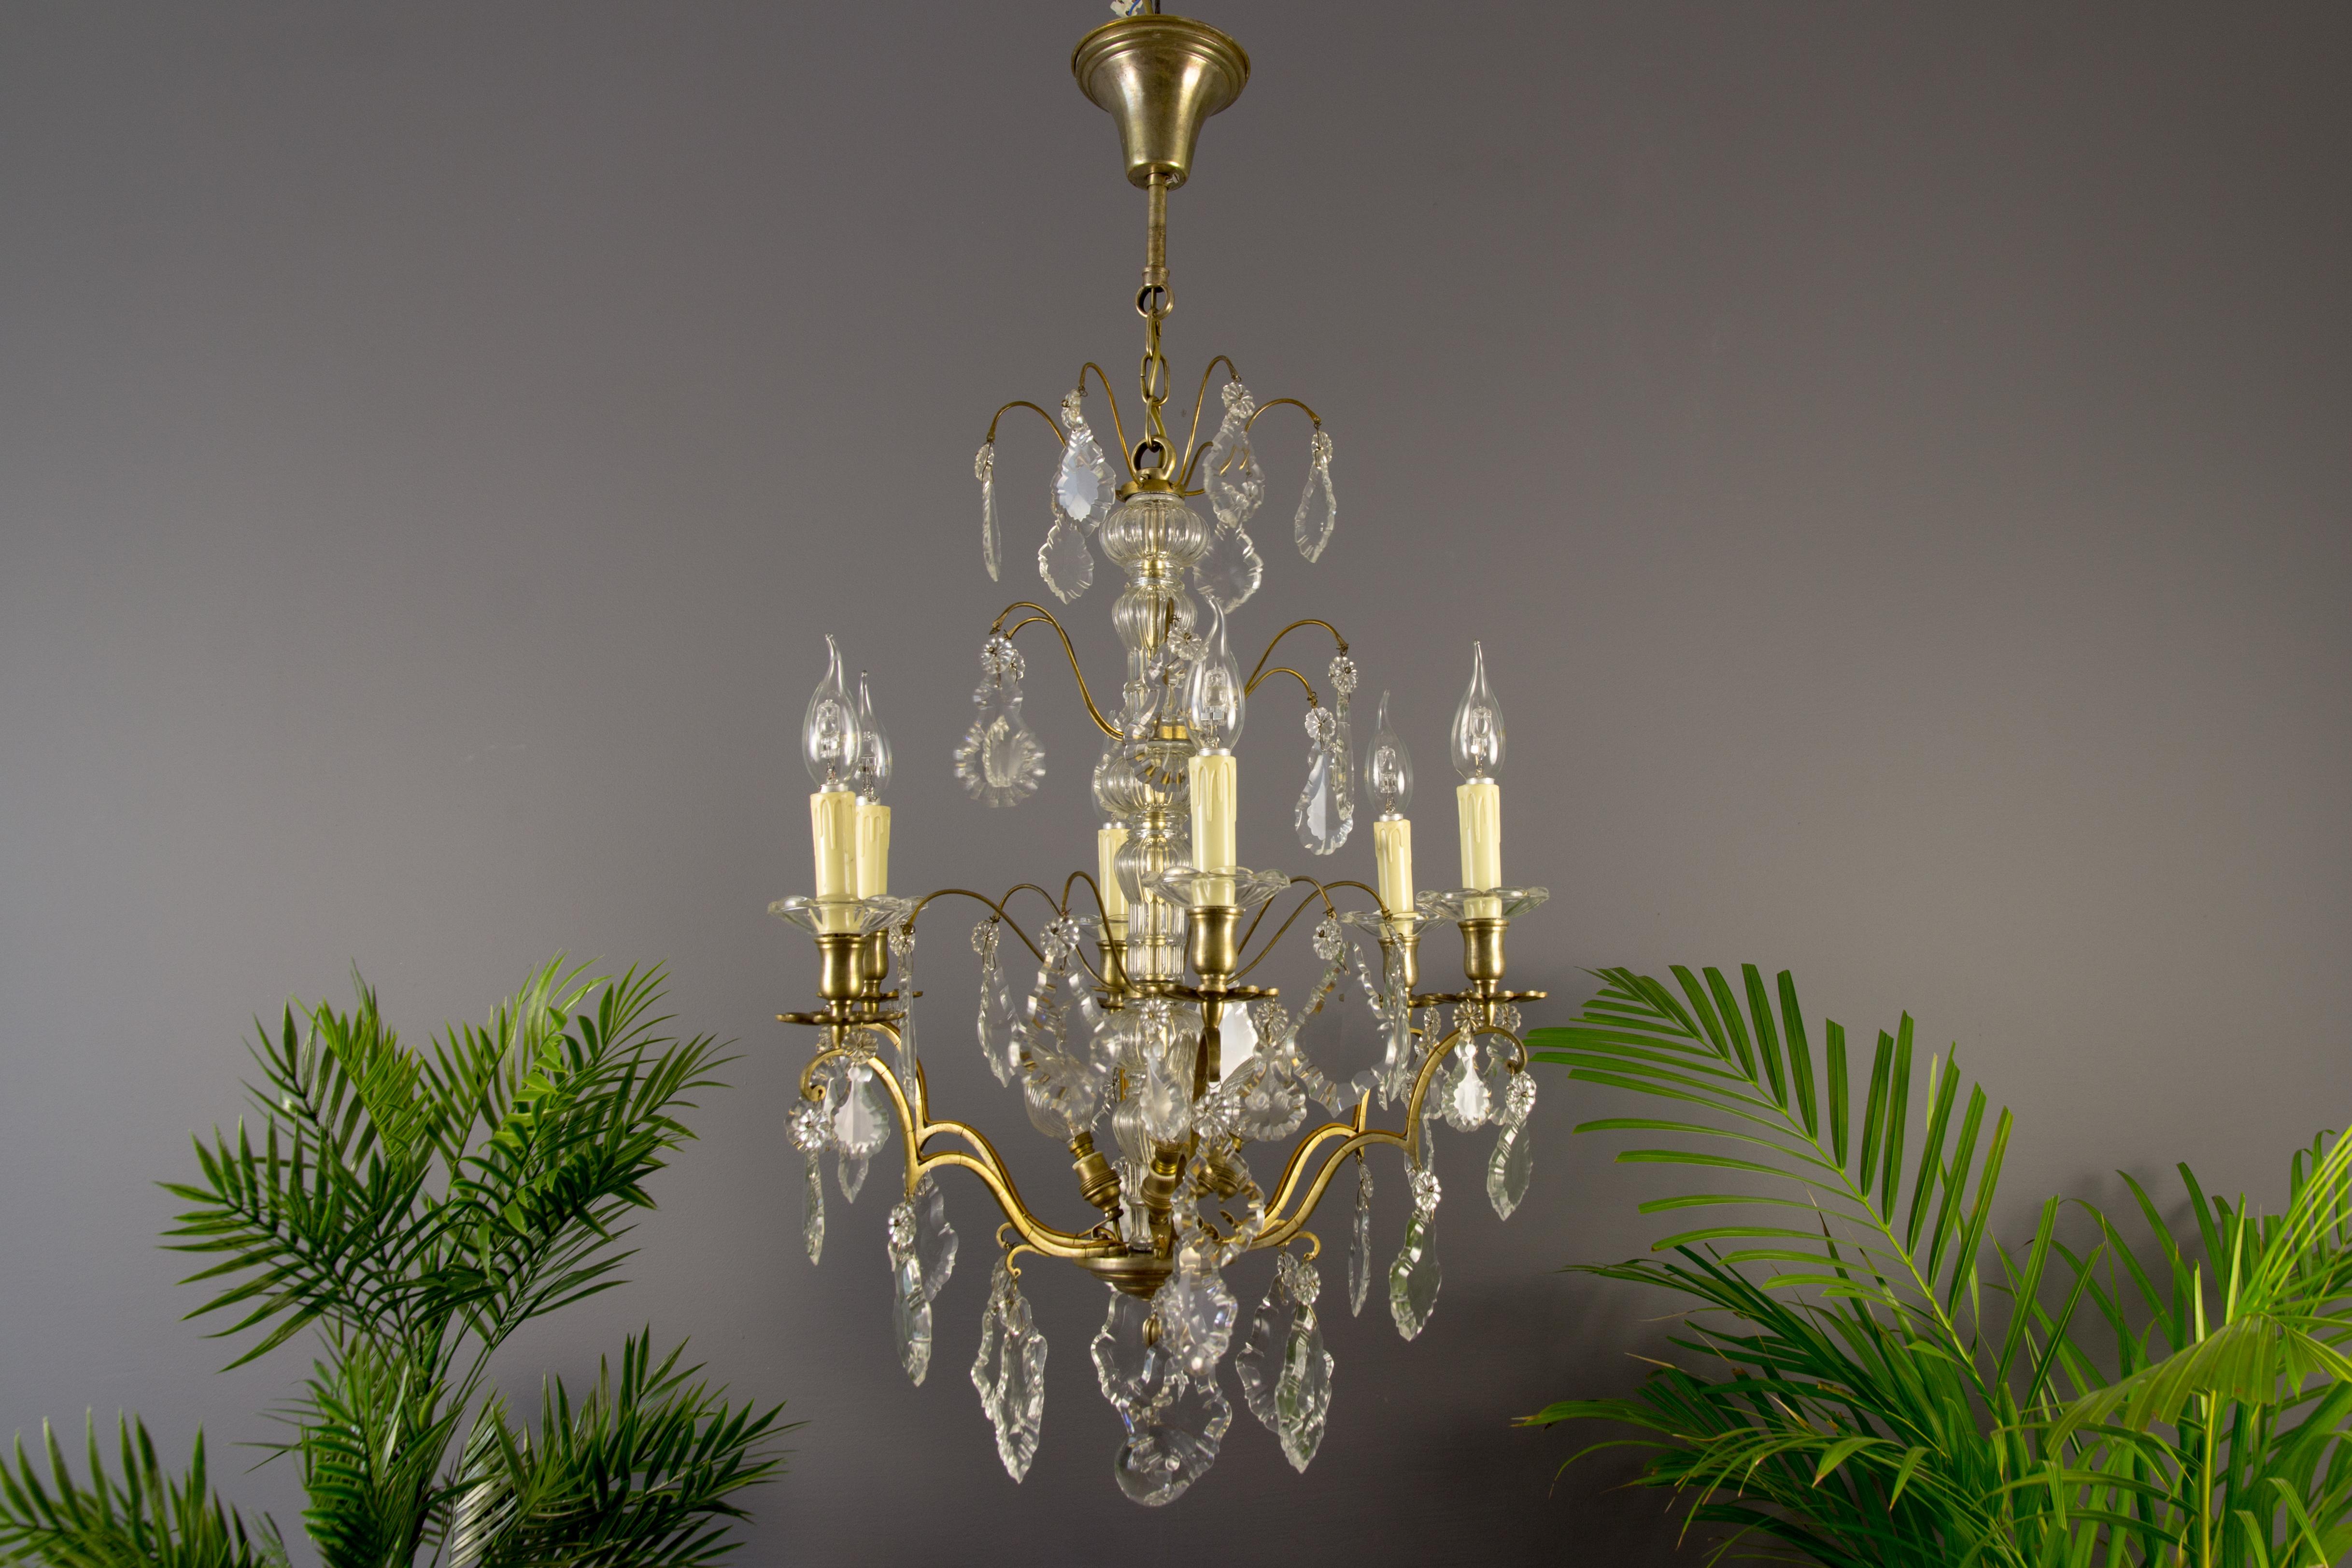 A stunning crystal and brass chandelier made in France in circa 1880. Originally crafted for 6 candles, this antique chandelier has been electrified and is newly rewired. Six brass arms with flower shaped brass and crystal bobeches, each with socket